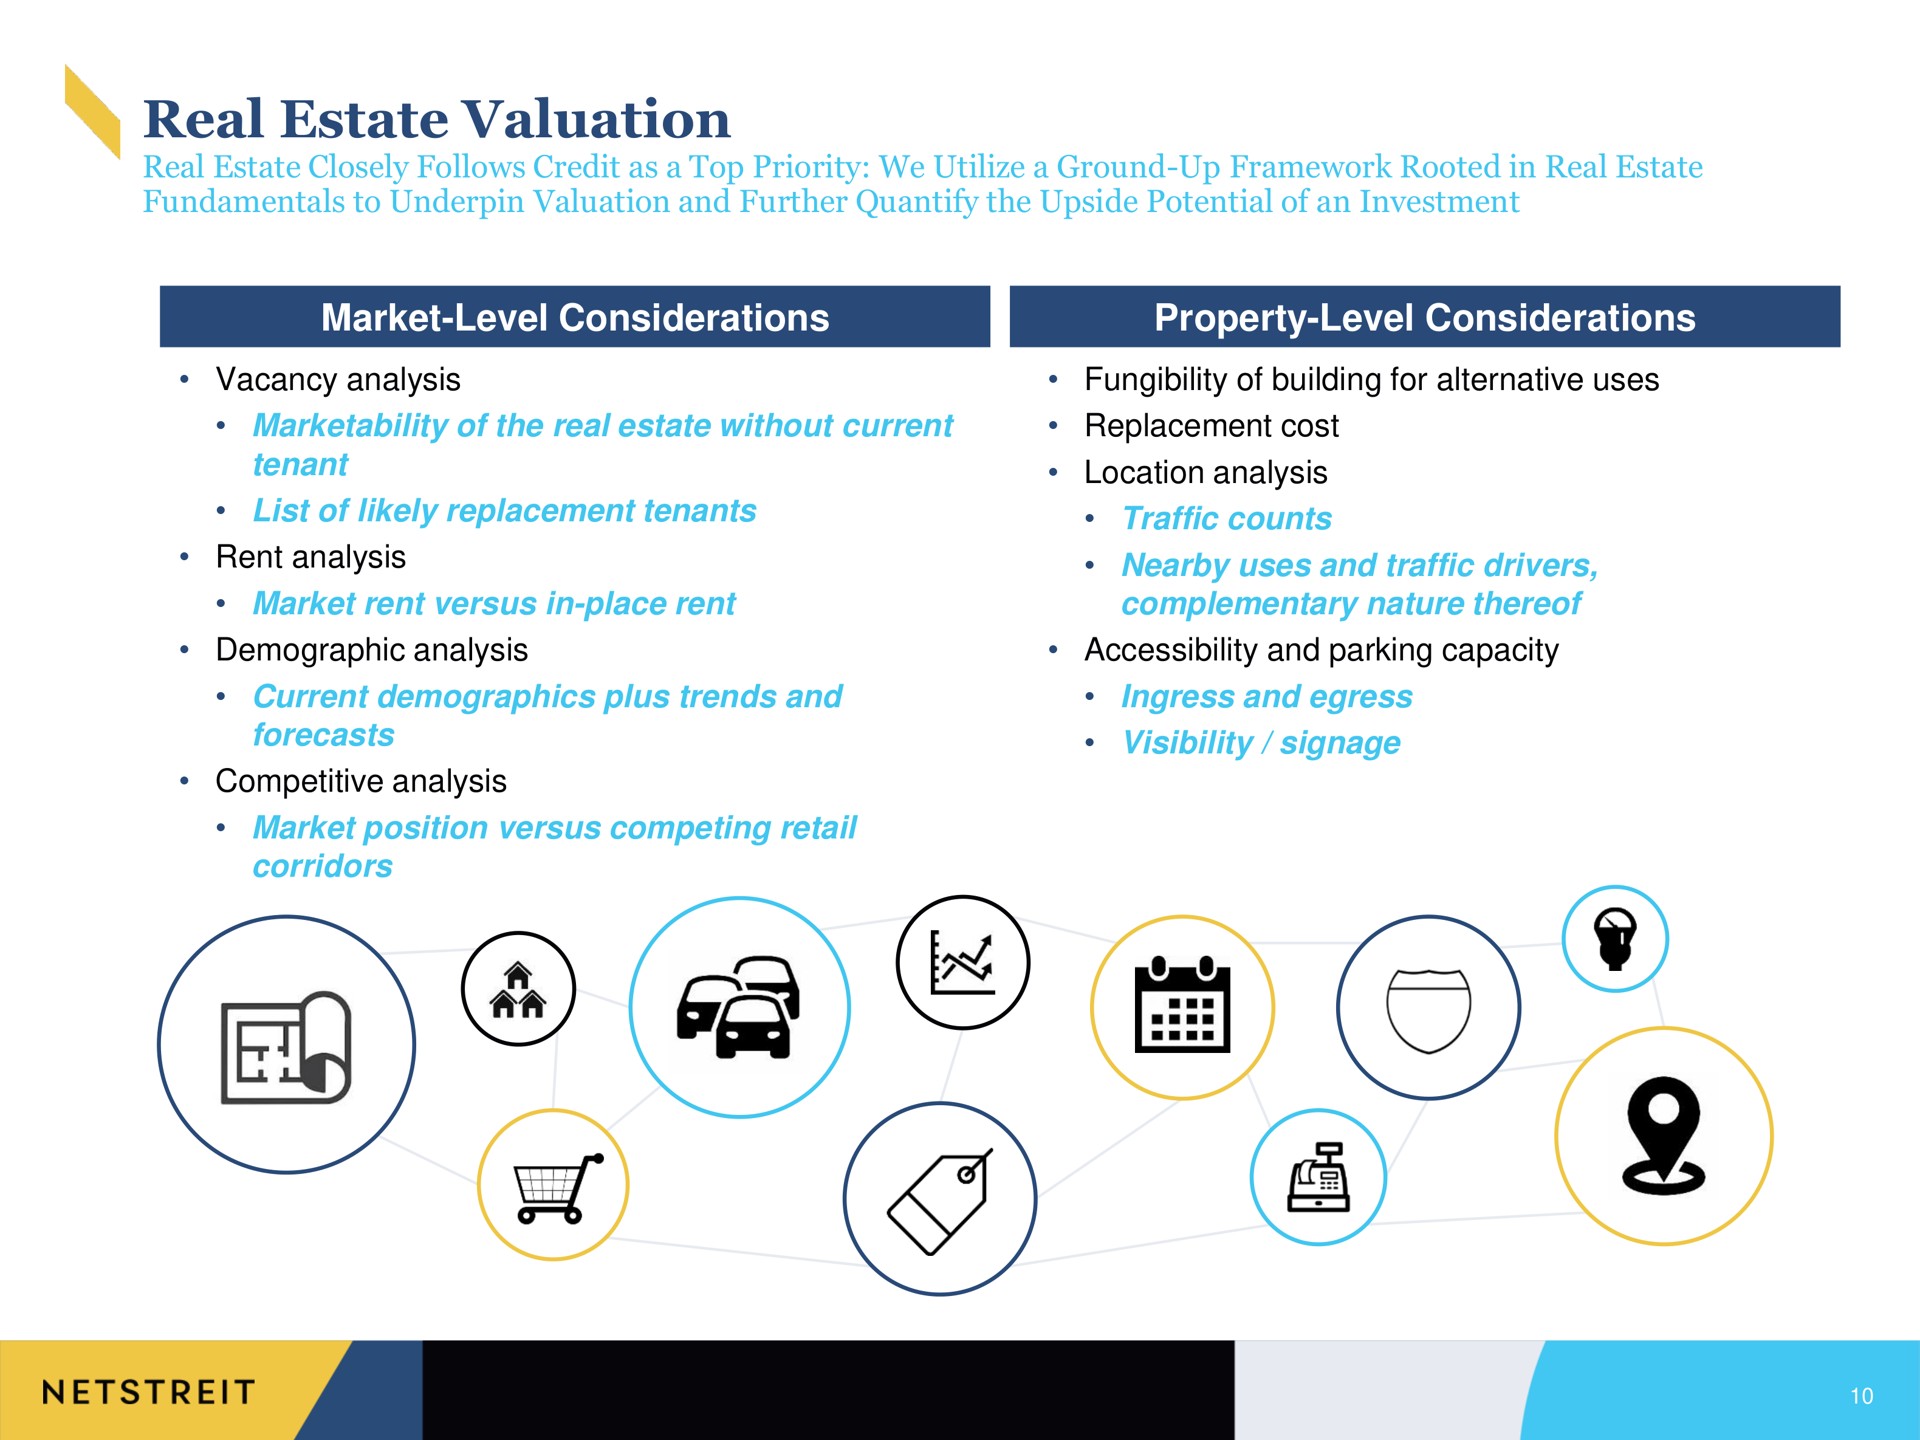 real estate valuation market level considerations property level considerations ore a | Netstreit